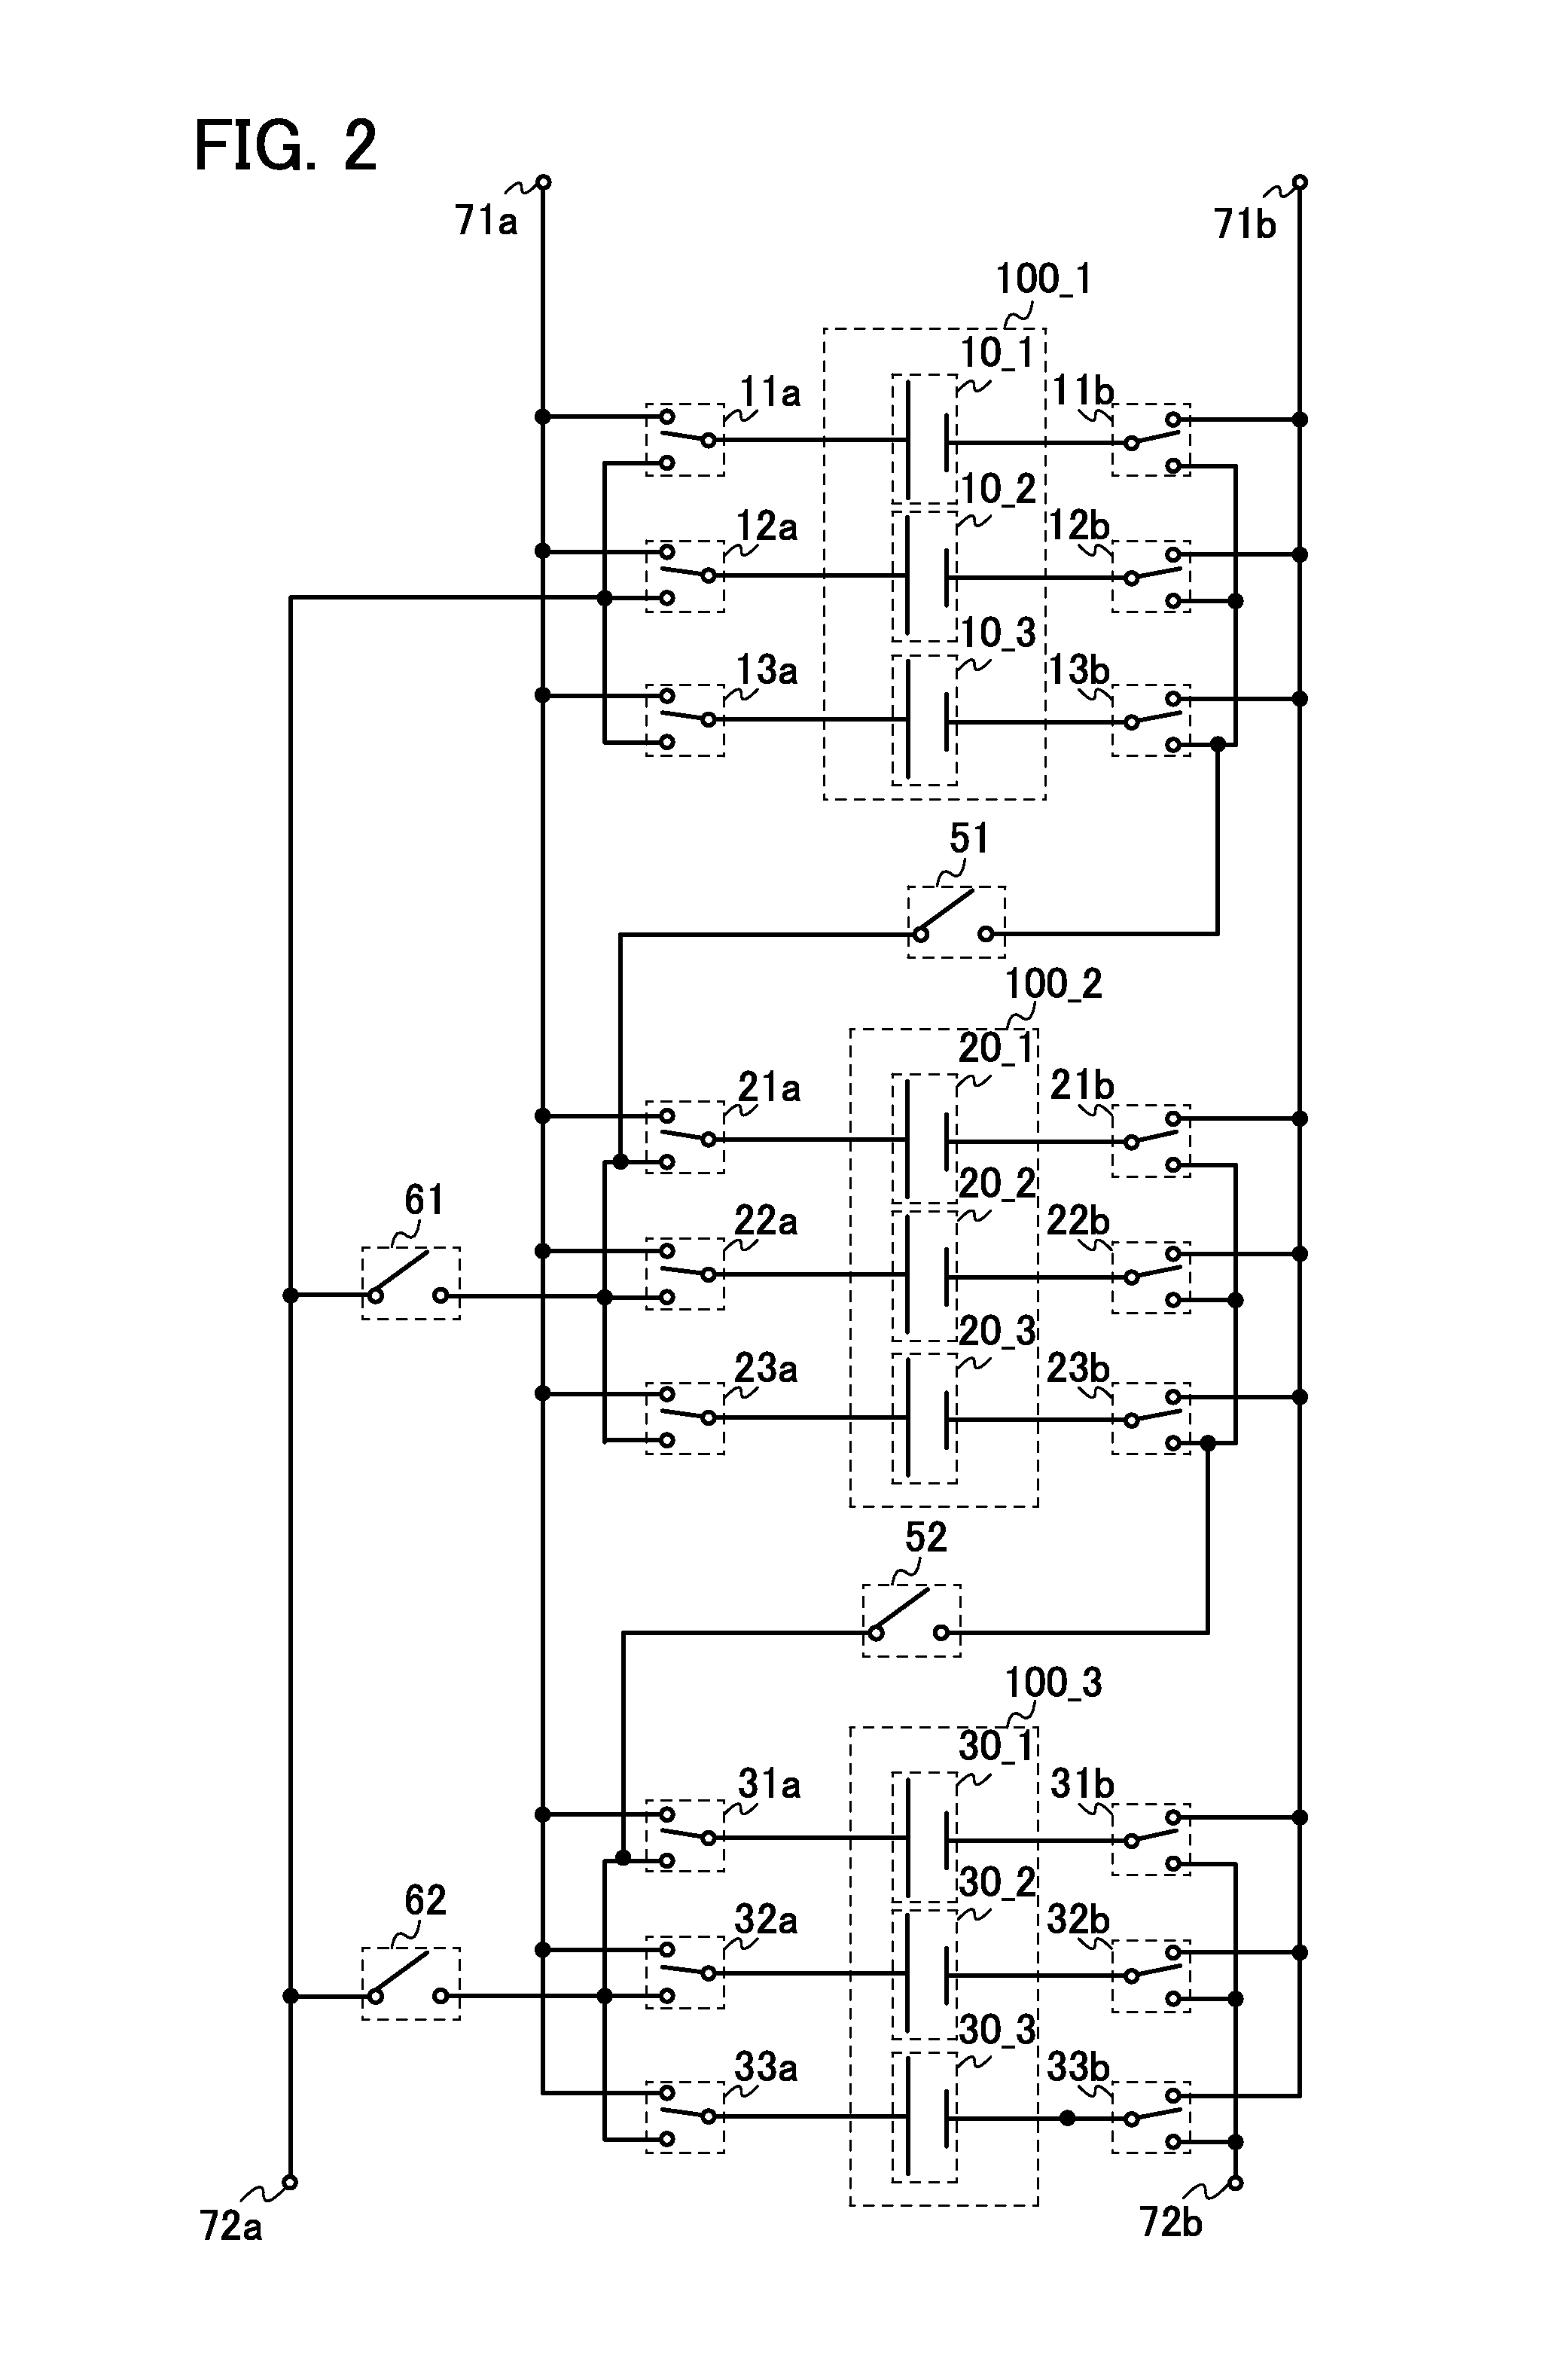 Power storage device control system, power storage system, and electrical appliance